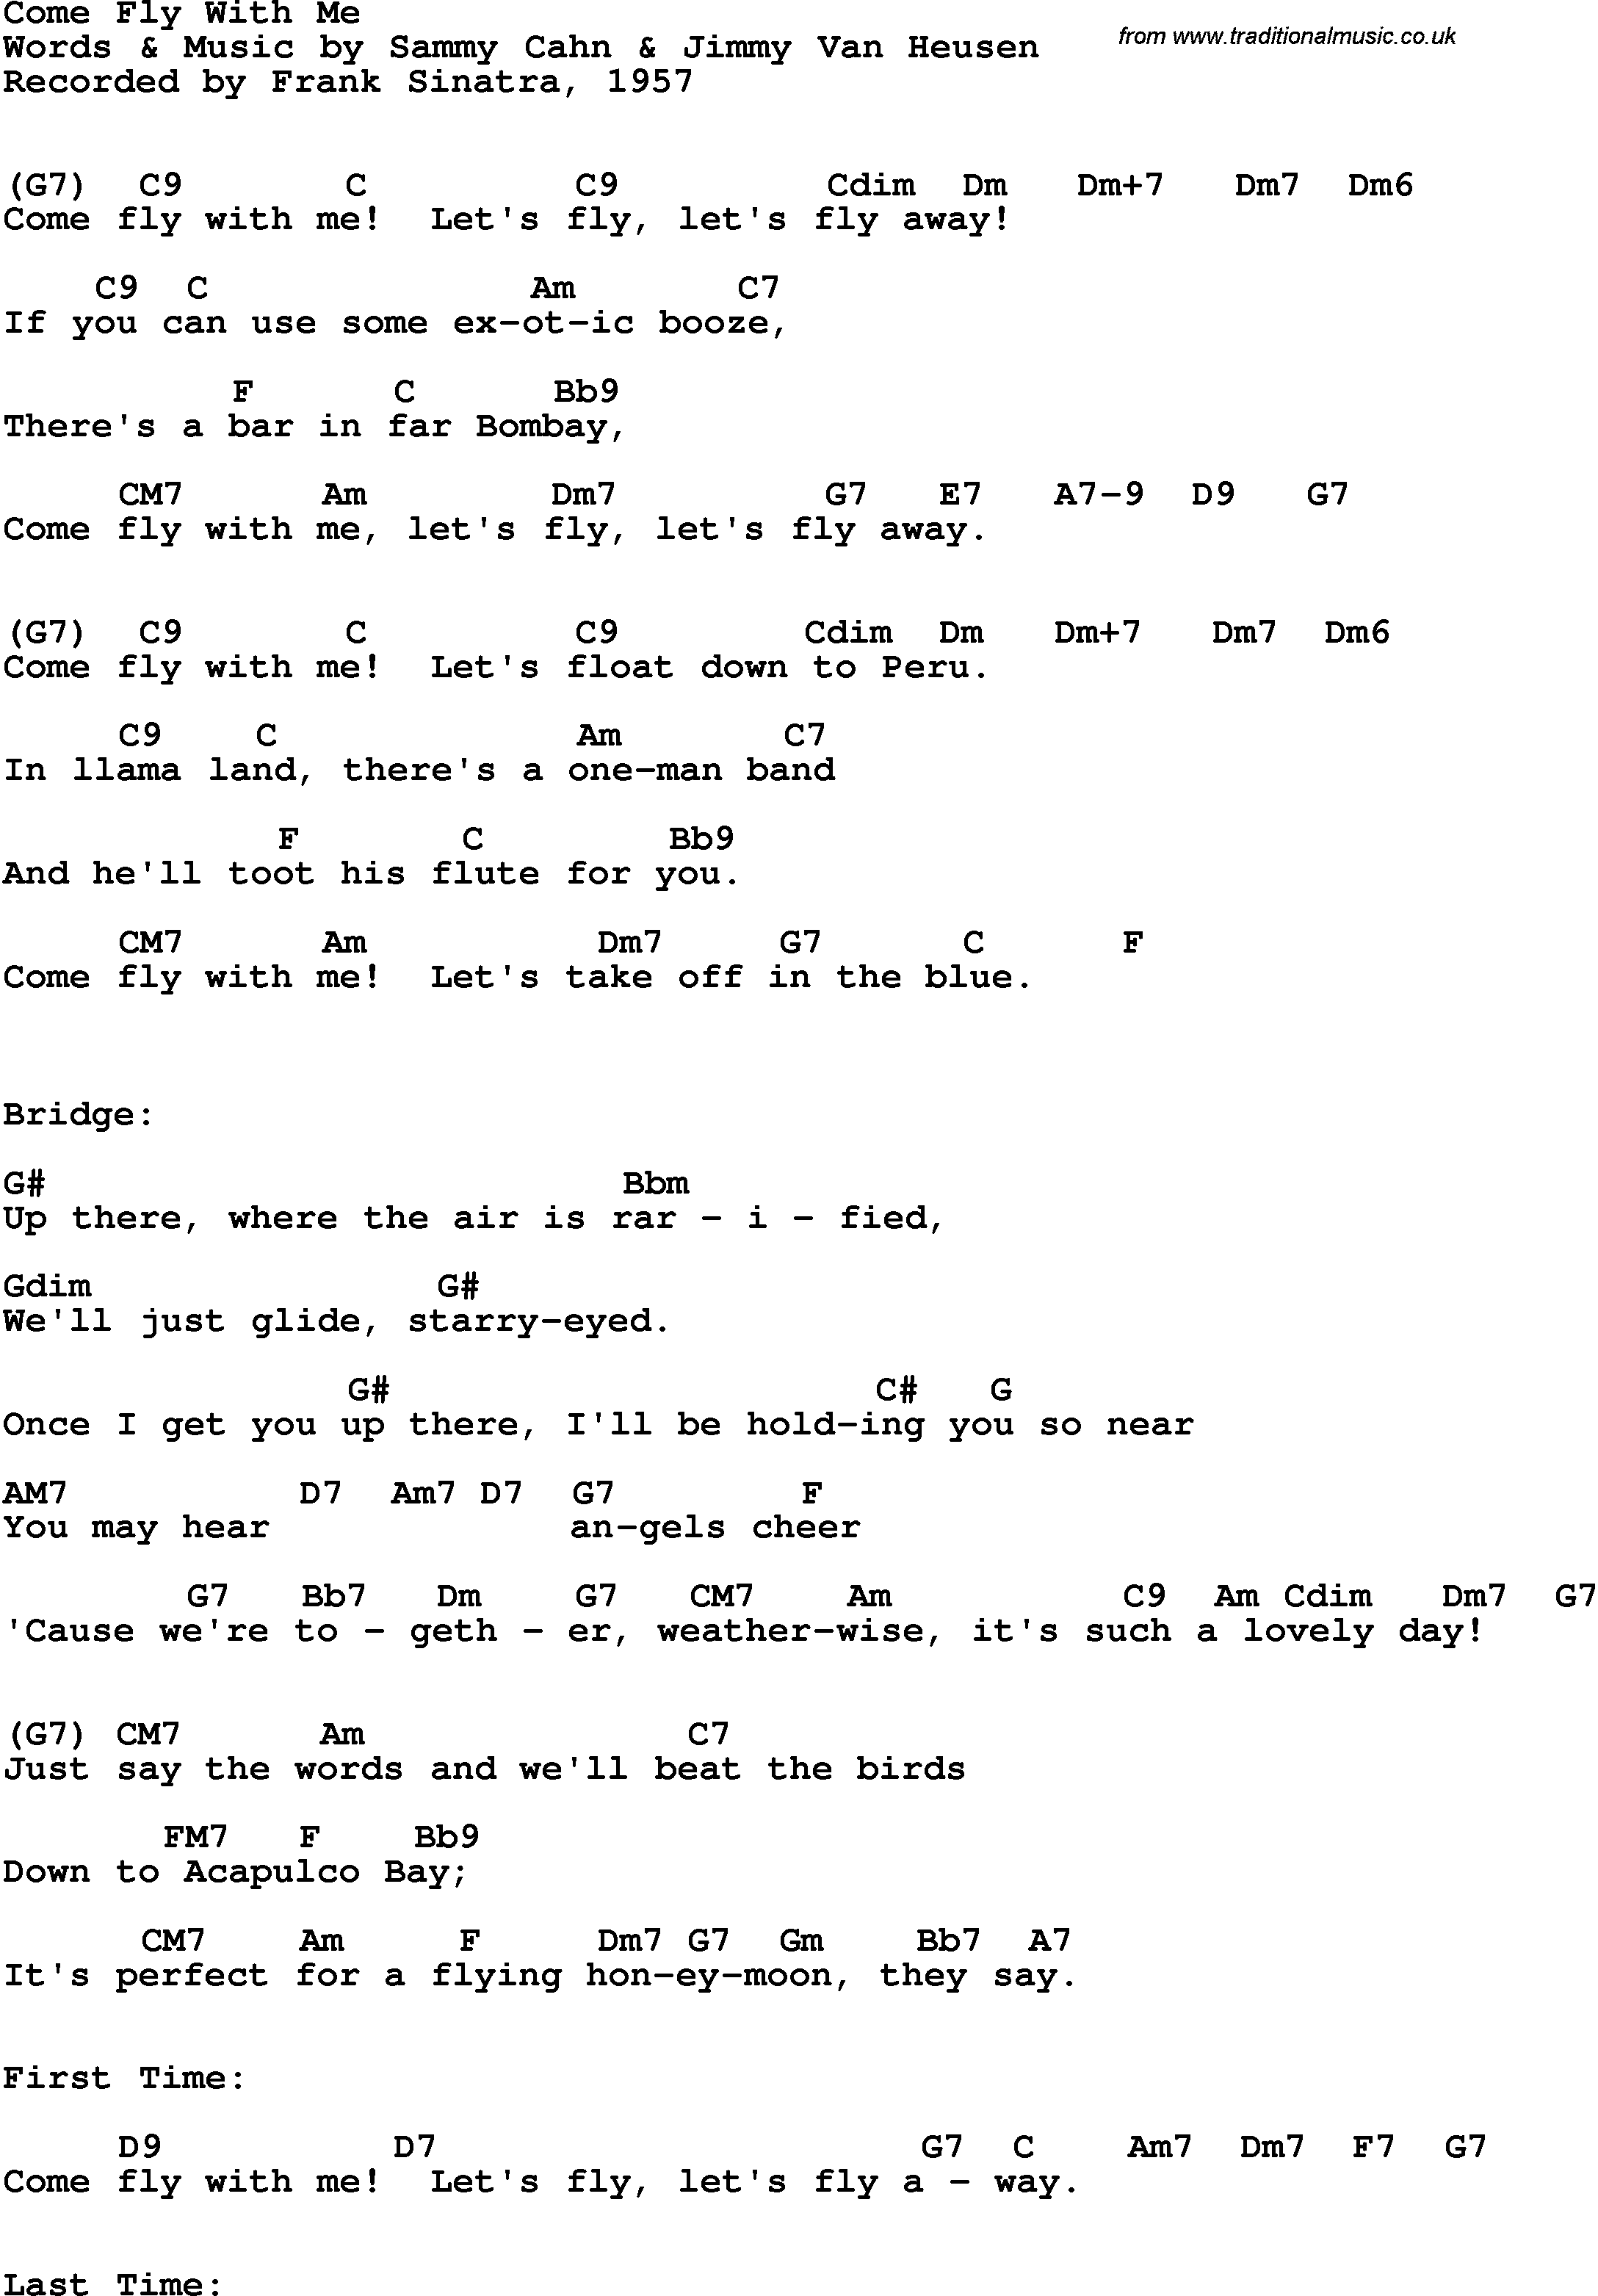 Song Lyrics With Guitar Chords For Come Fly With Me Frank Sinatra 1957